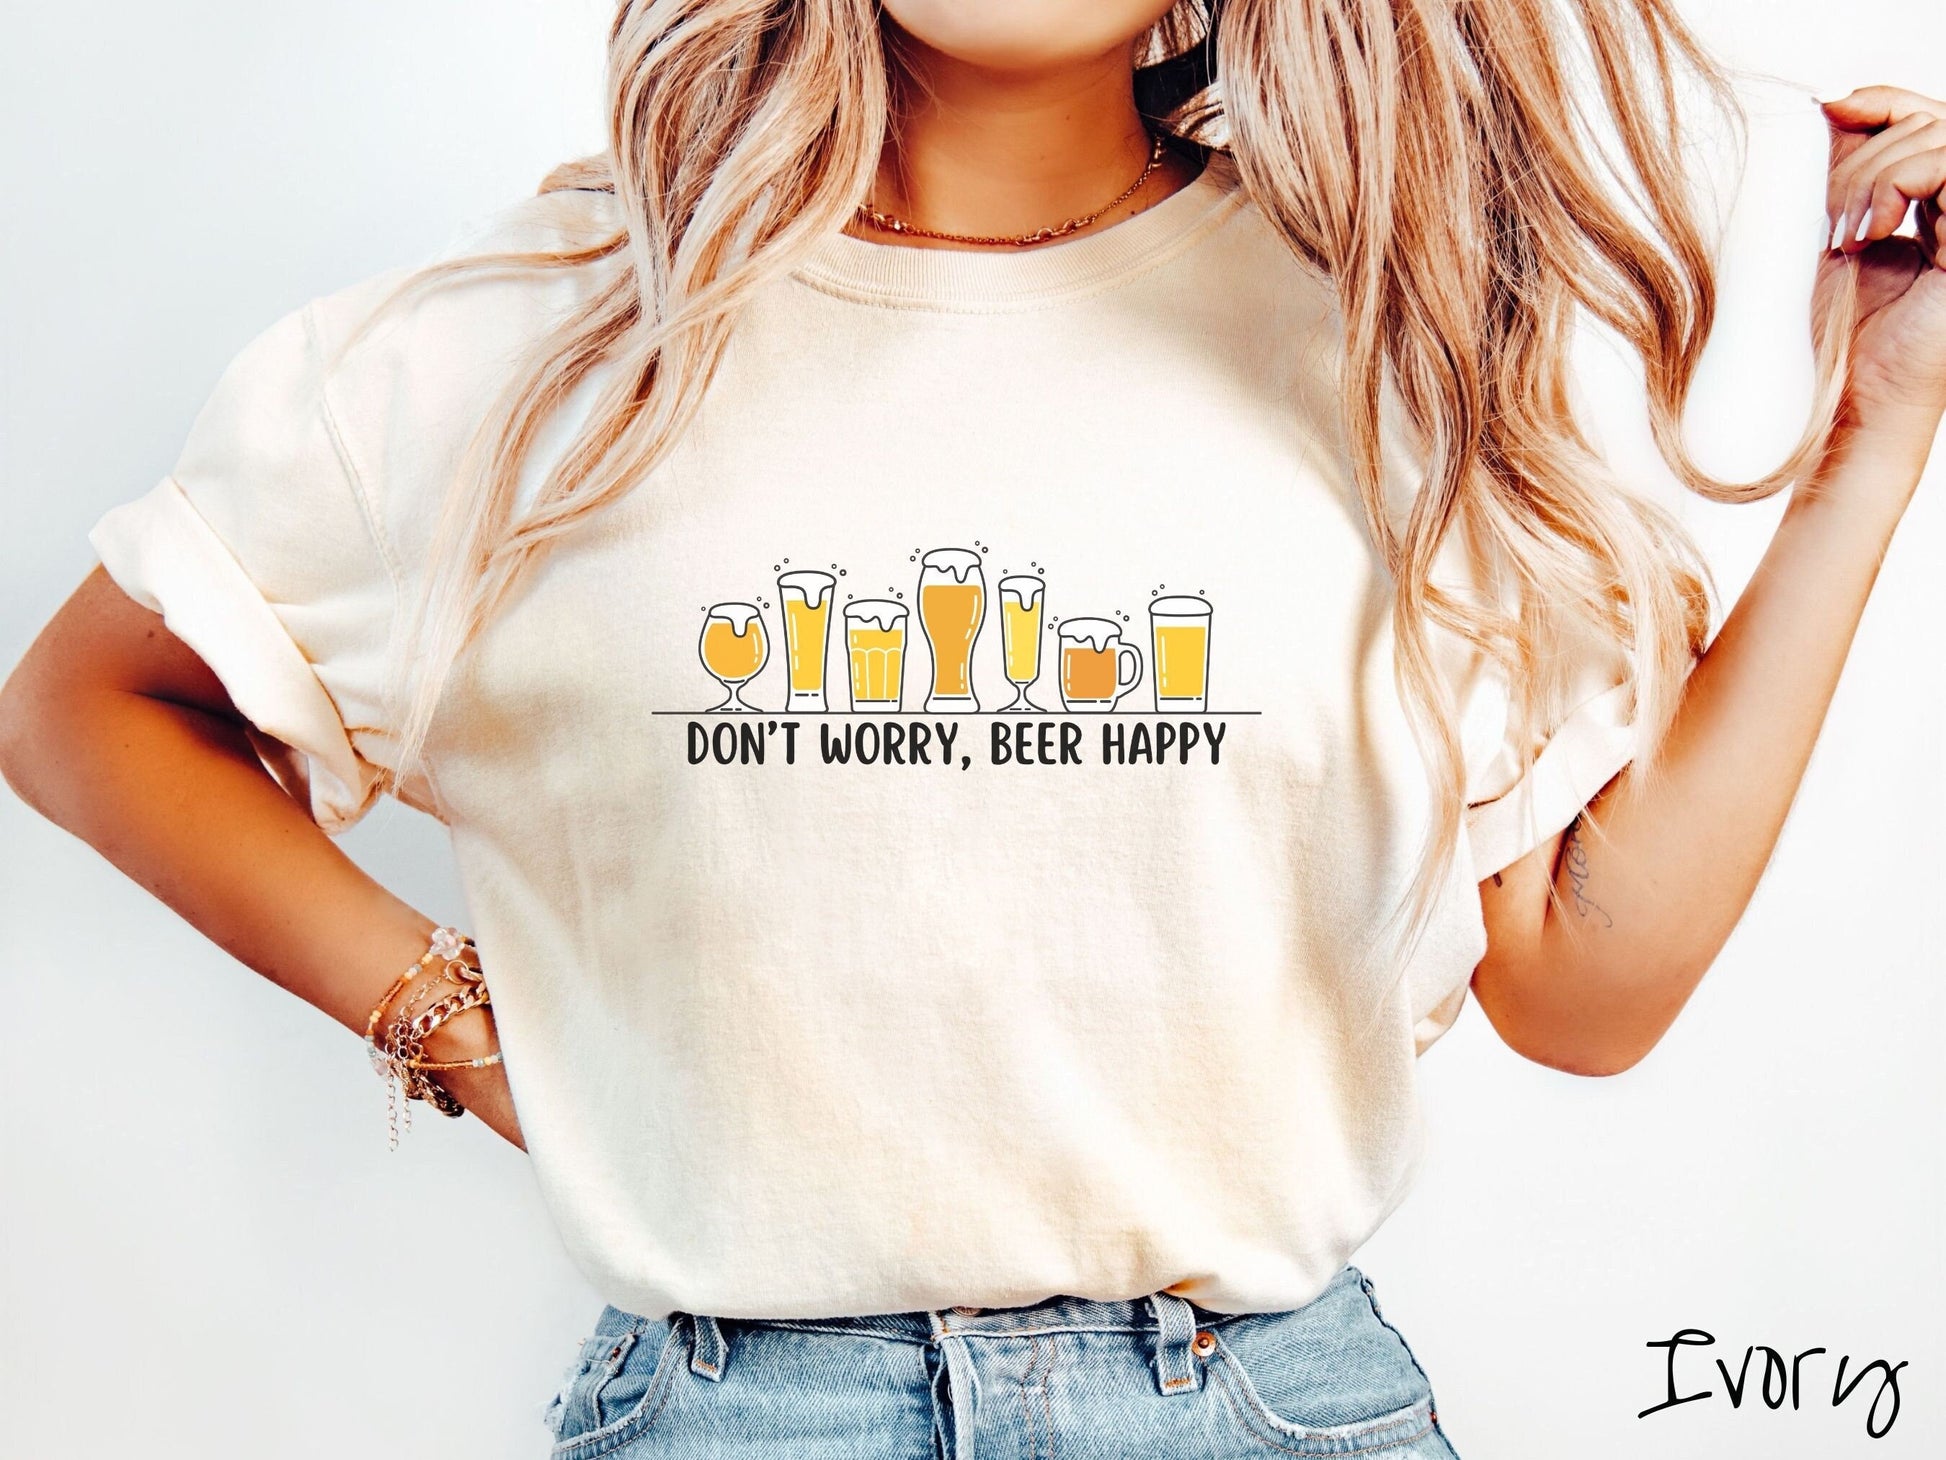 A woman wearing a vintage, ivory colored shirt with the text Dont Worry, Beer happy, and above this are varying sizes and shapes of beer glasses with yellow and orange ber all of them have foam coming out the tops.